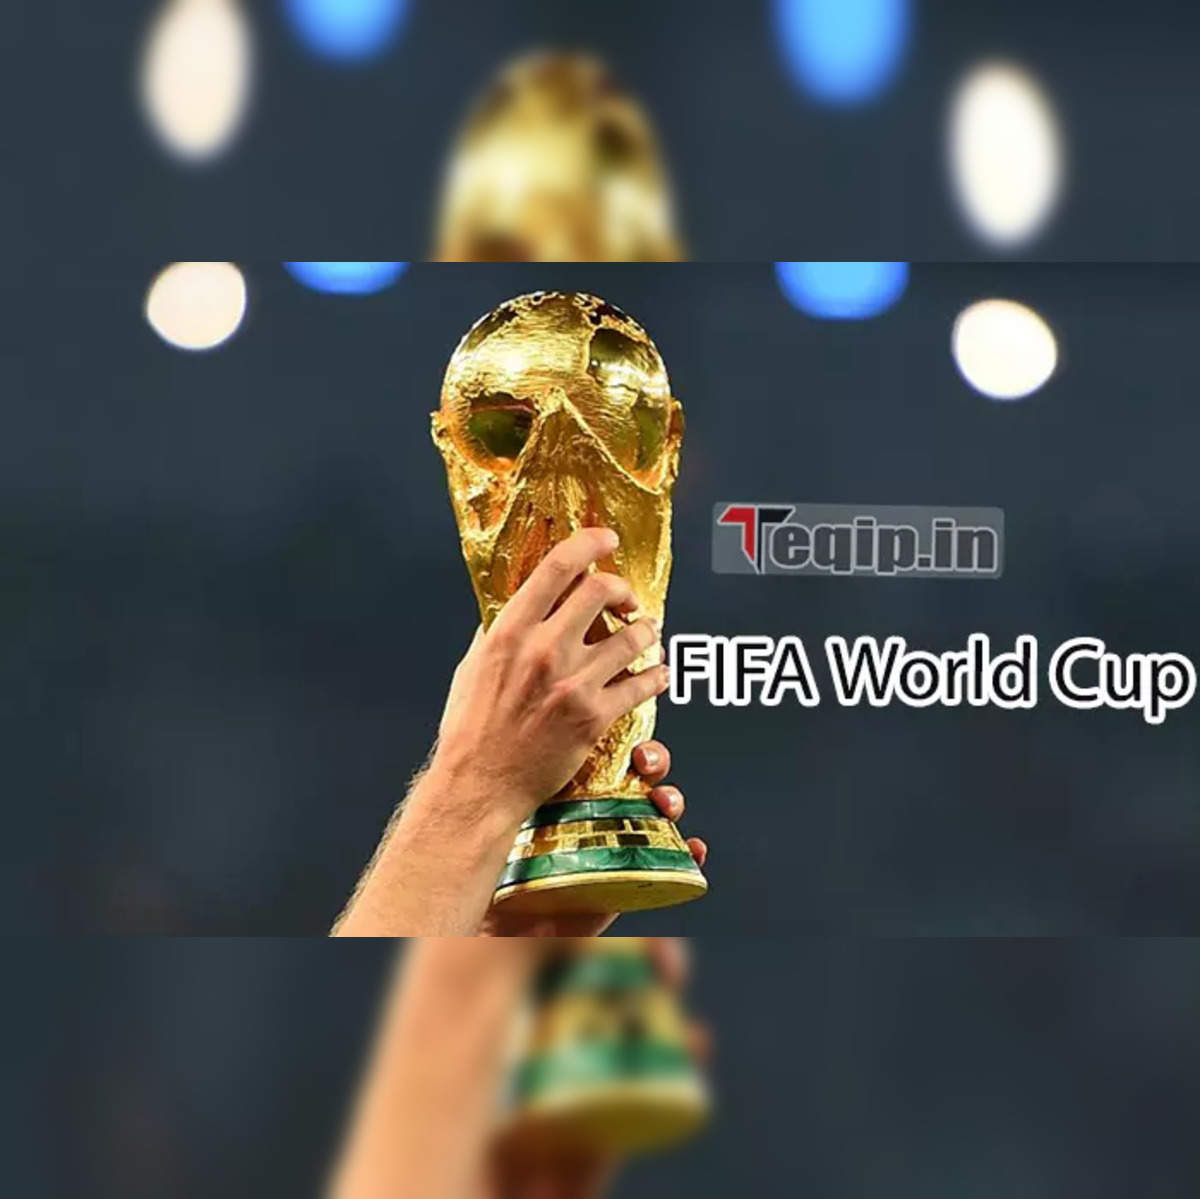 FIFA World Cup Qatar 2022 - Schedule, Odds and Betting Info